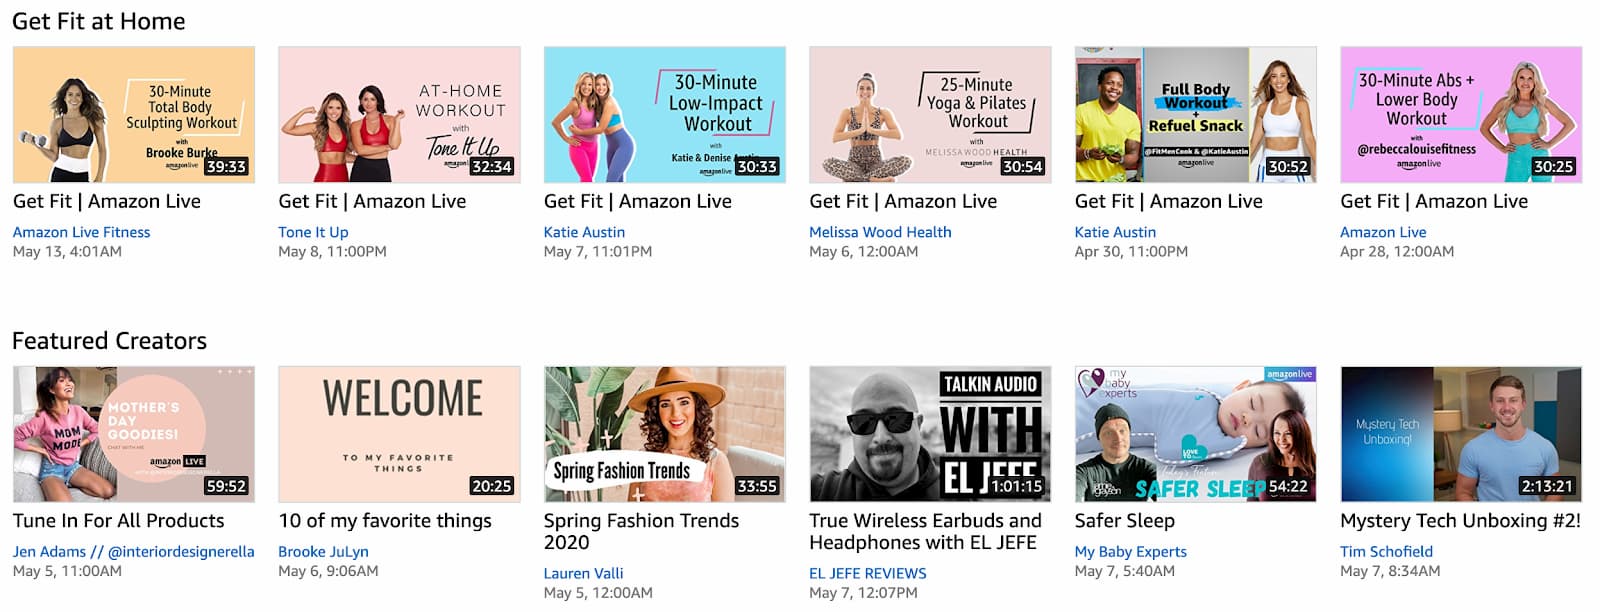 Livestream thumbnails appearing on the Amazon Live homepage (1)